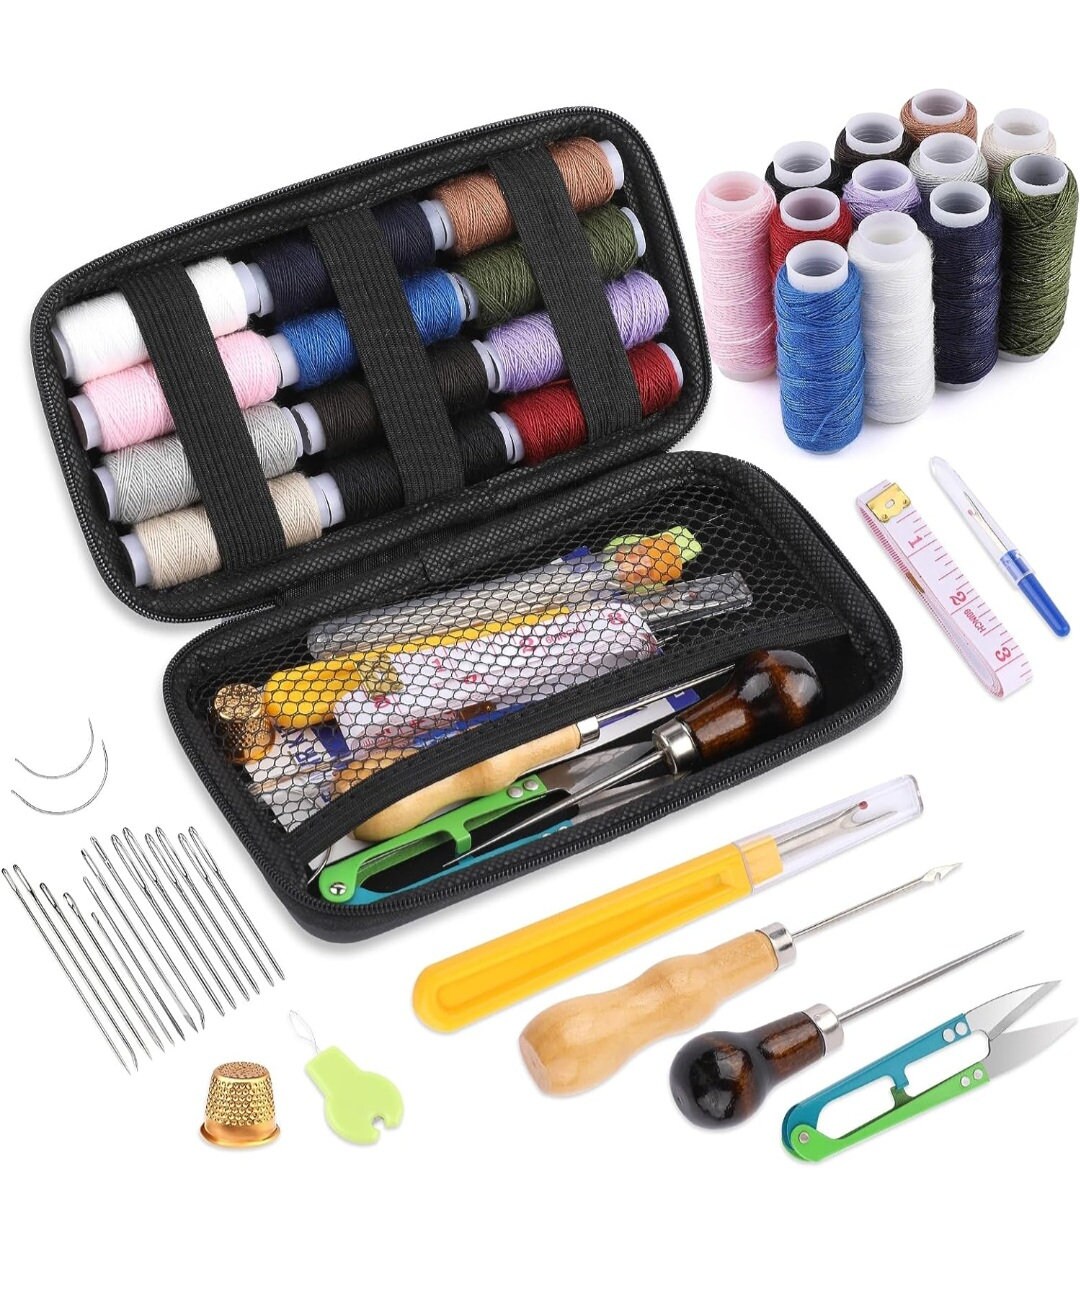 Marcoon Sewing Kit, Zipper Portable Mini Sewing Kits for Adults, Kids,  Traveler, Beginner, Emergency, Family Repair, Sewing Supplies